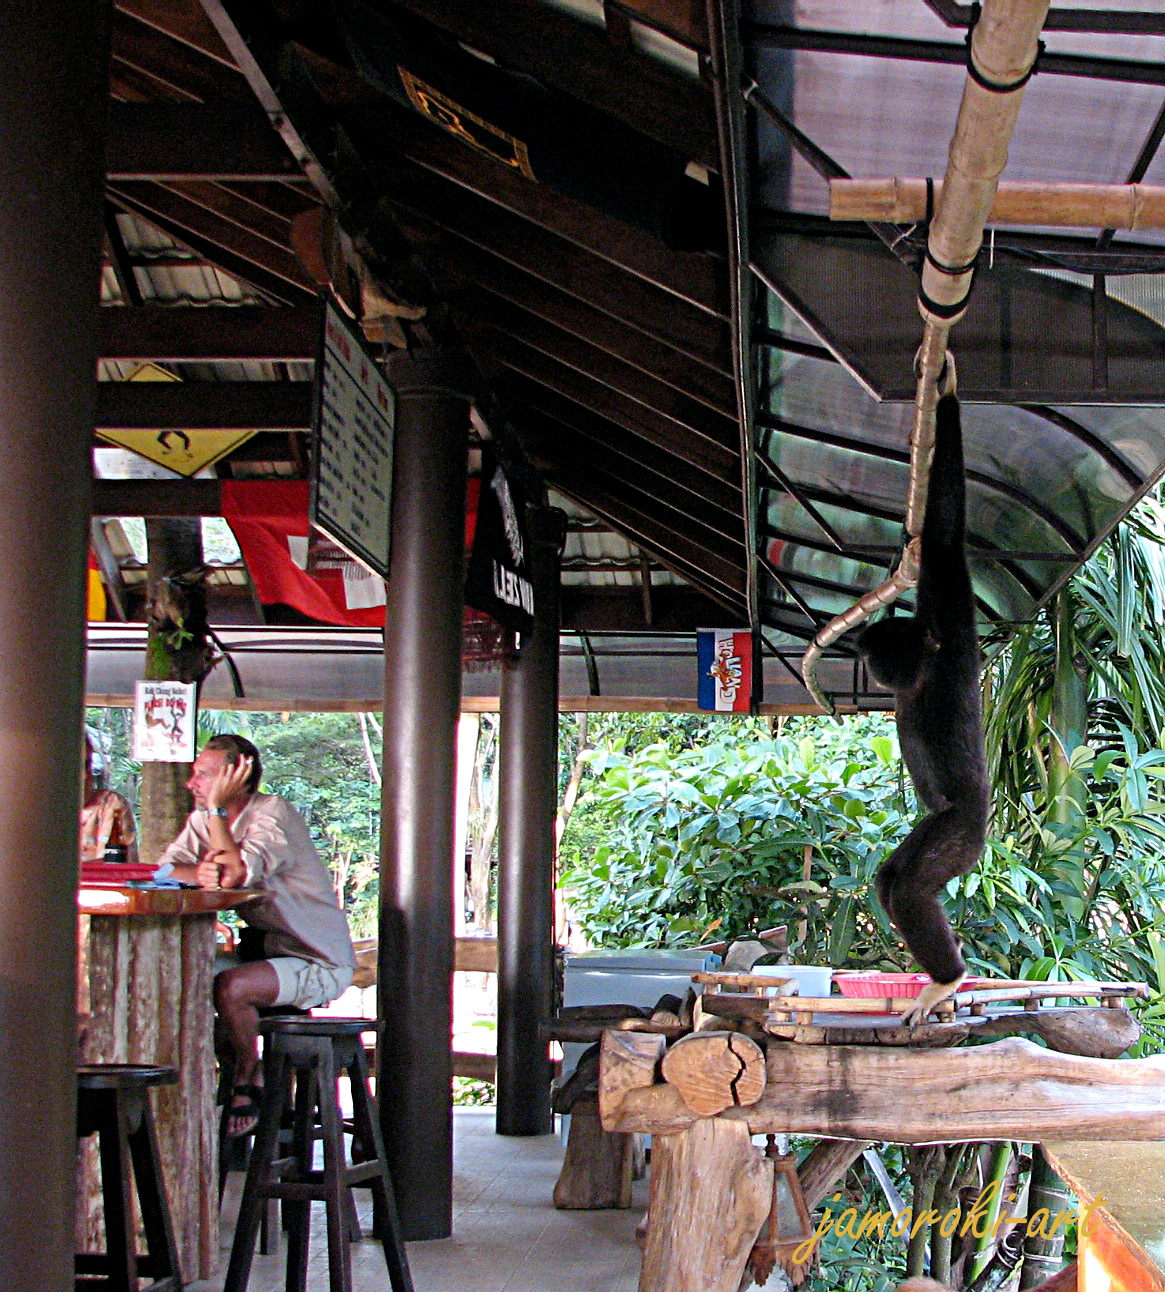 Is this the swingers bar? - Gibbons in Thailand